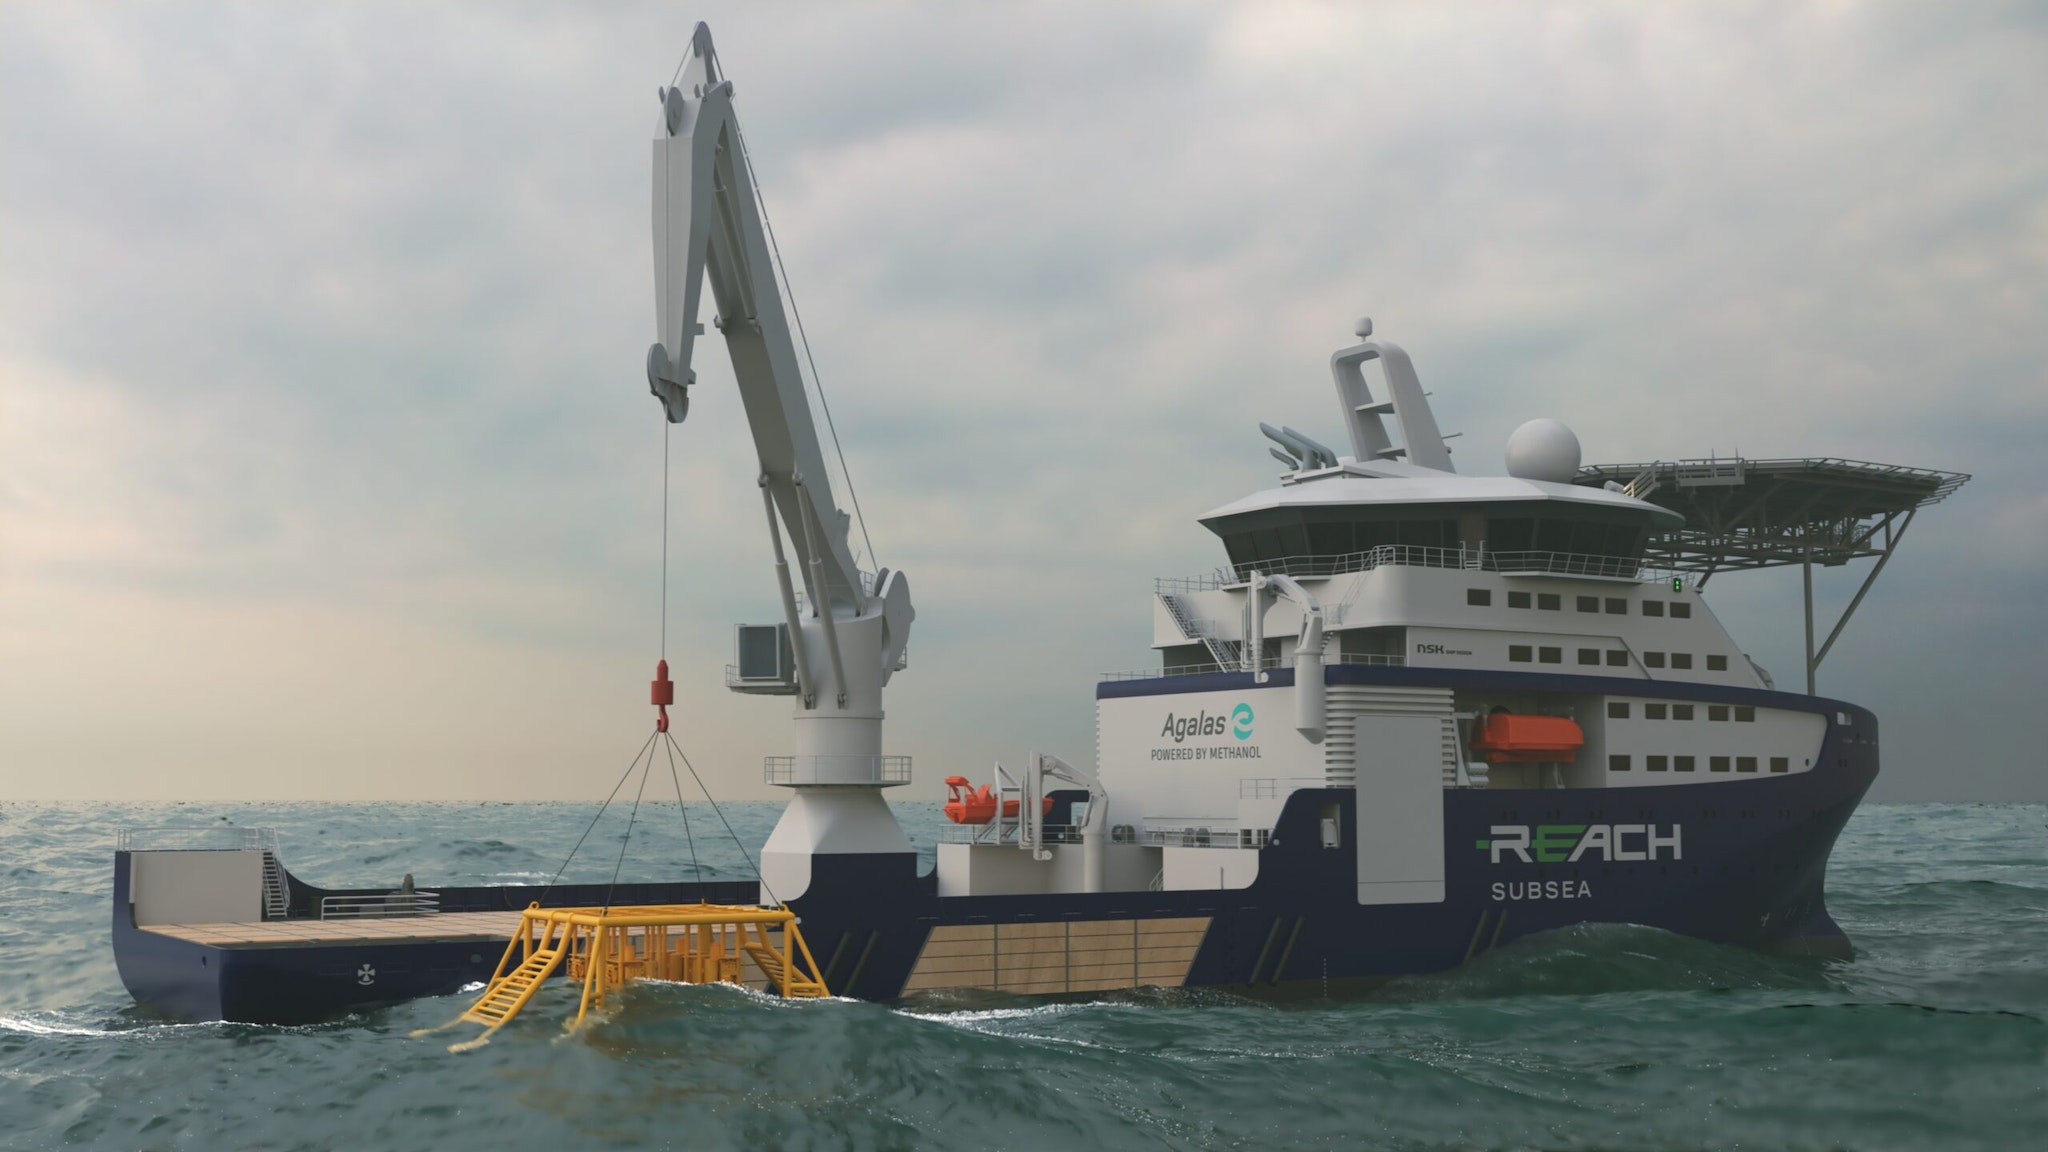 Reach Subsea inks charter contract for low-emission survey vessel